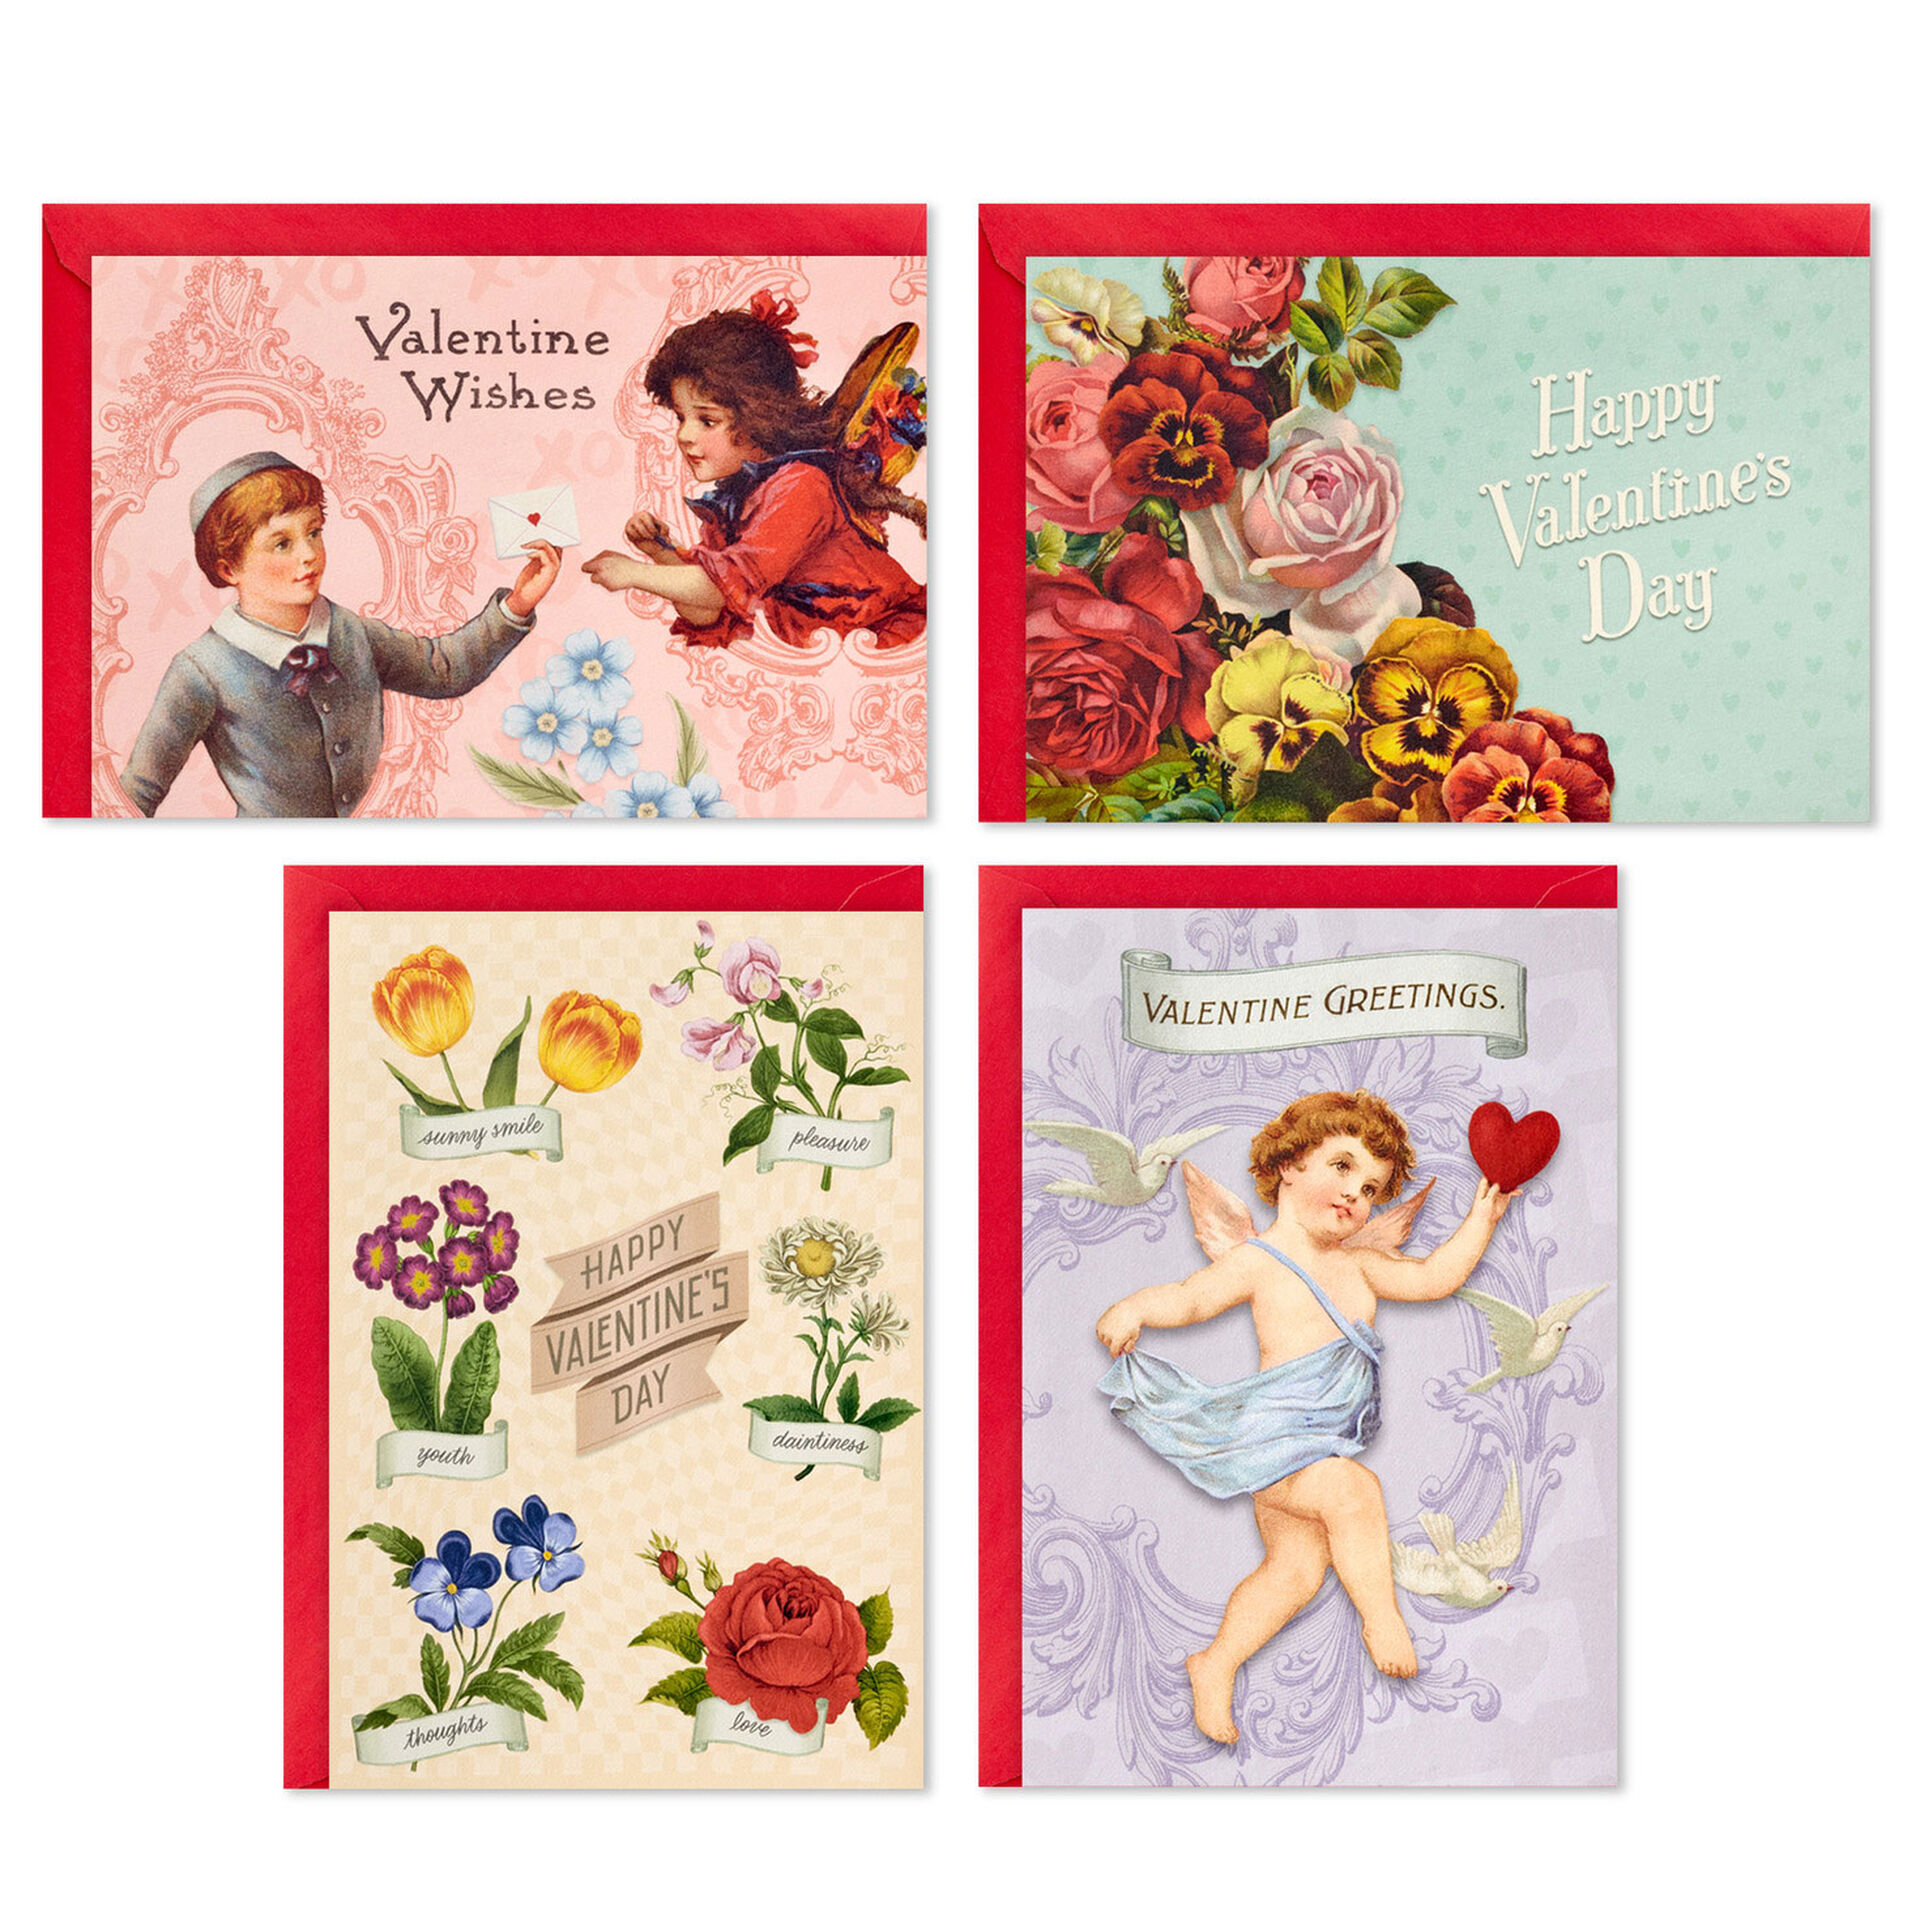 Vintage-Archives-Boxed-Valentines-Day-Cards_5VBX2964_03